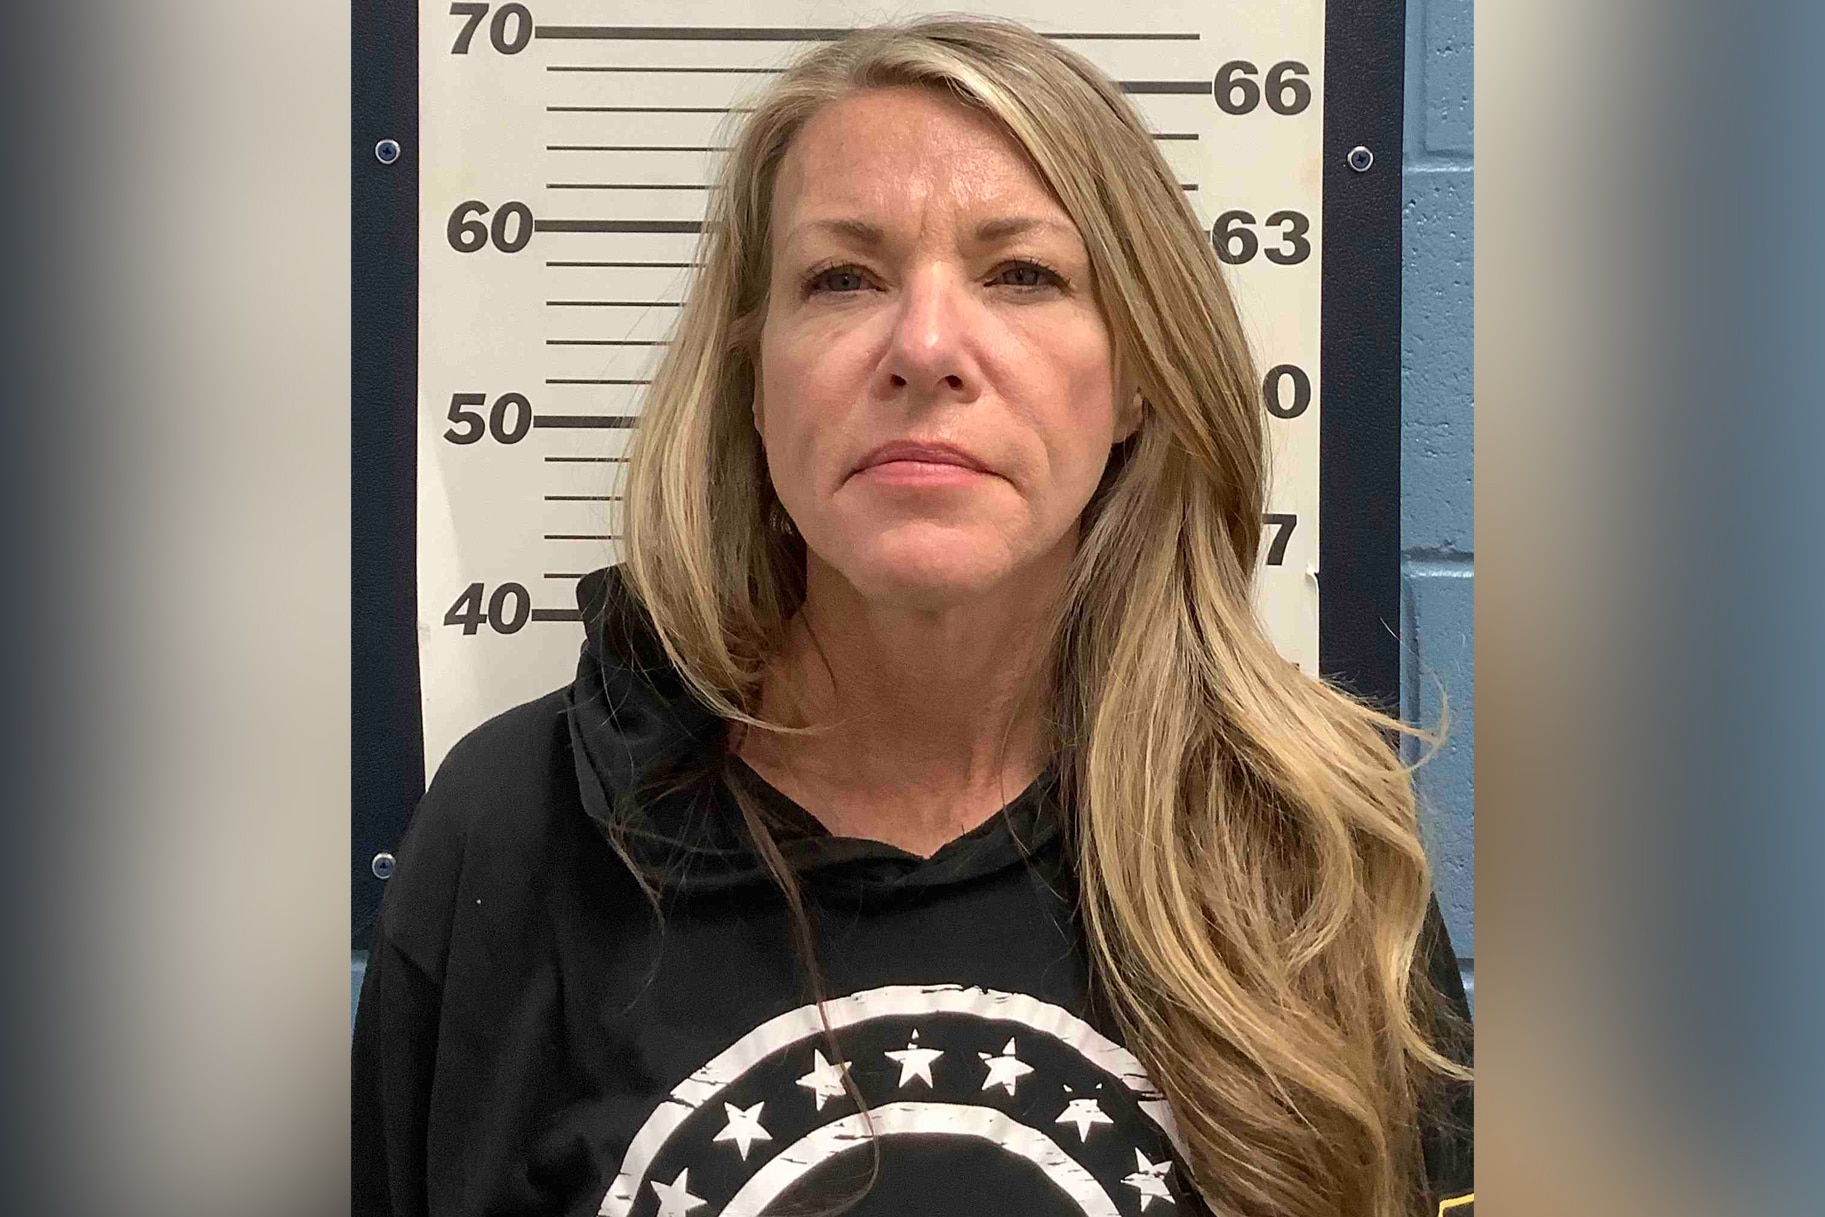 New police photo of Lori Vallow Daybell